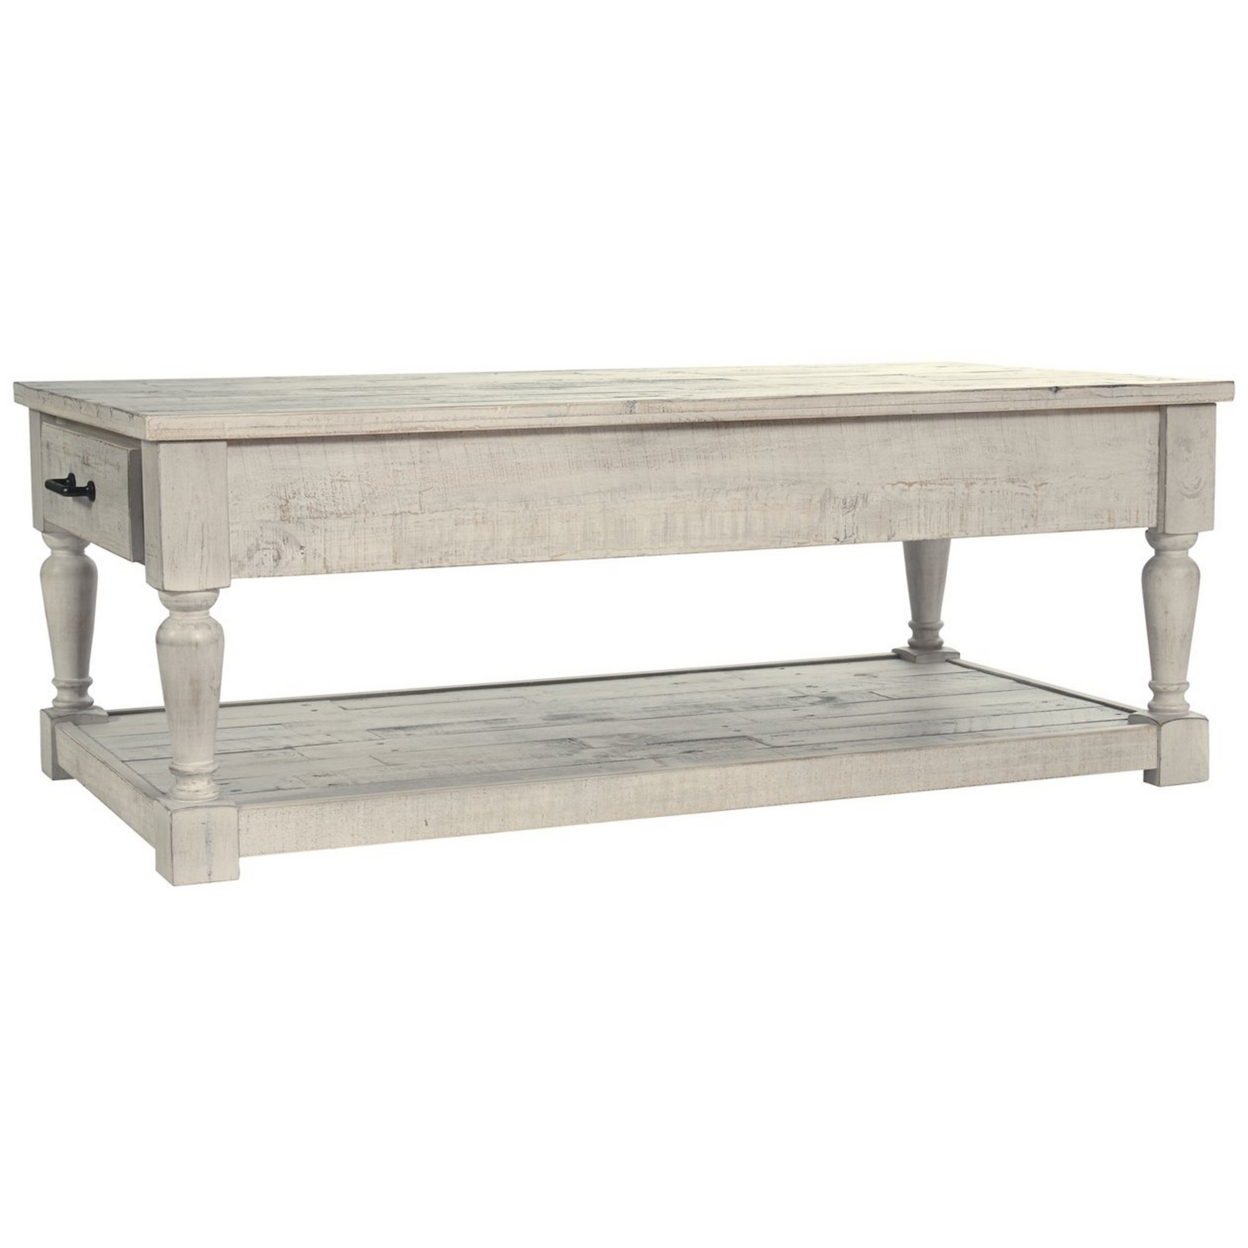 Plank Style Rectangular Cocktail Table With 2 Drawers, White- Saltoro Sherpi